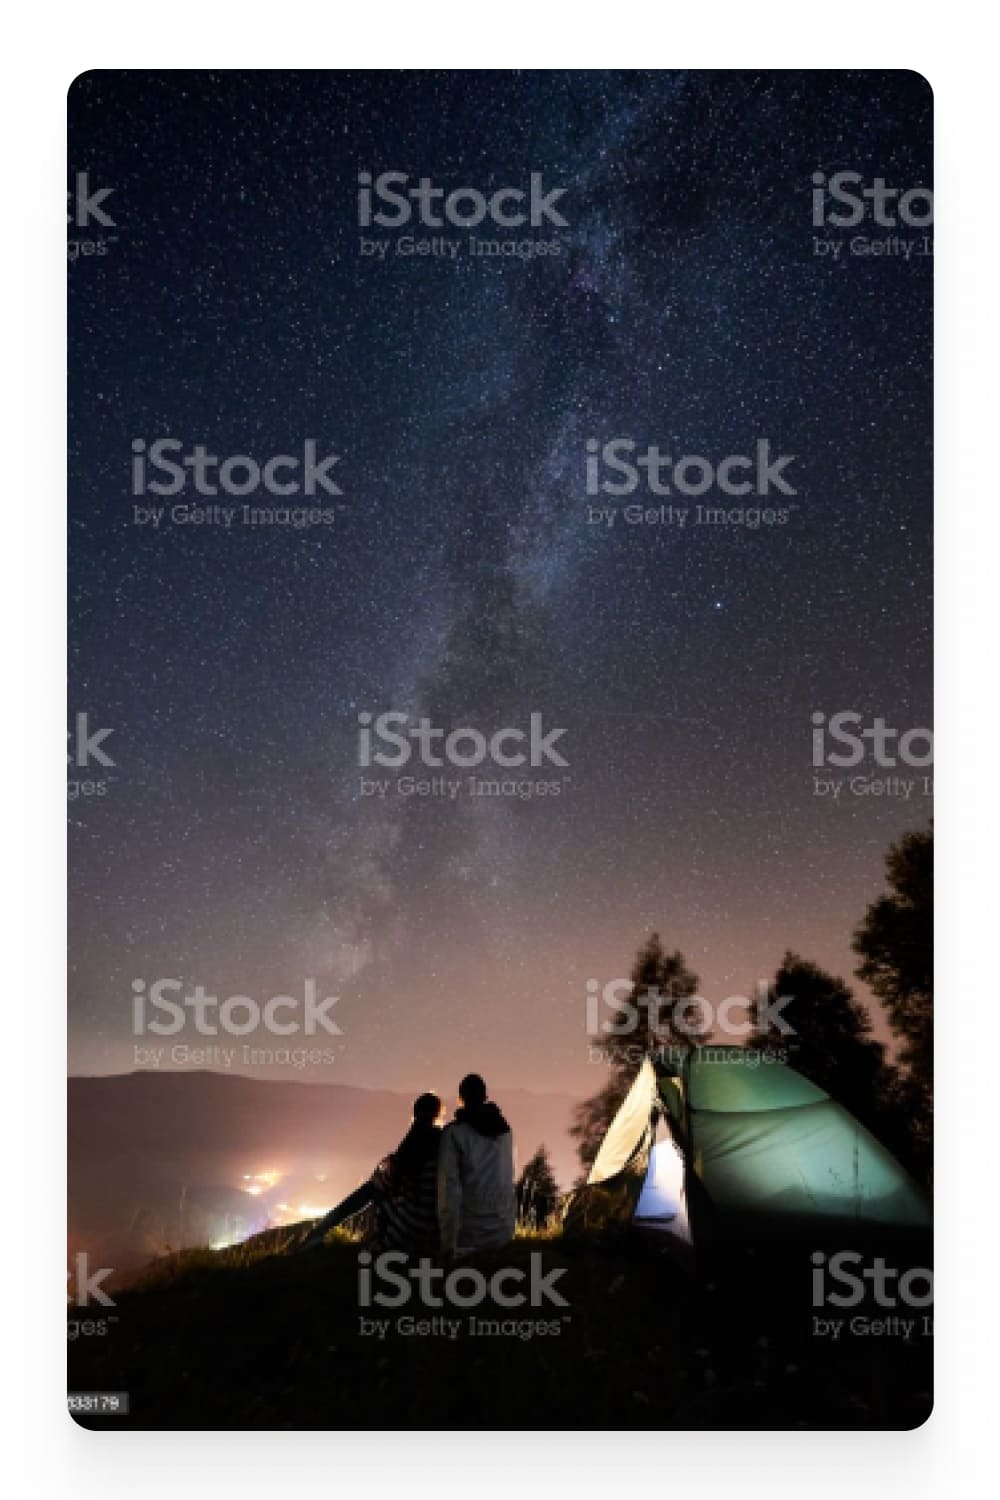 Photo of a tent and a couple in her against the background of a starry sky.